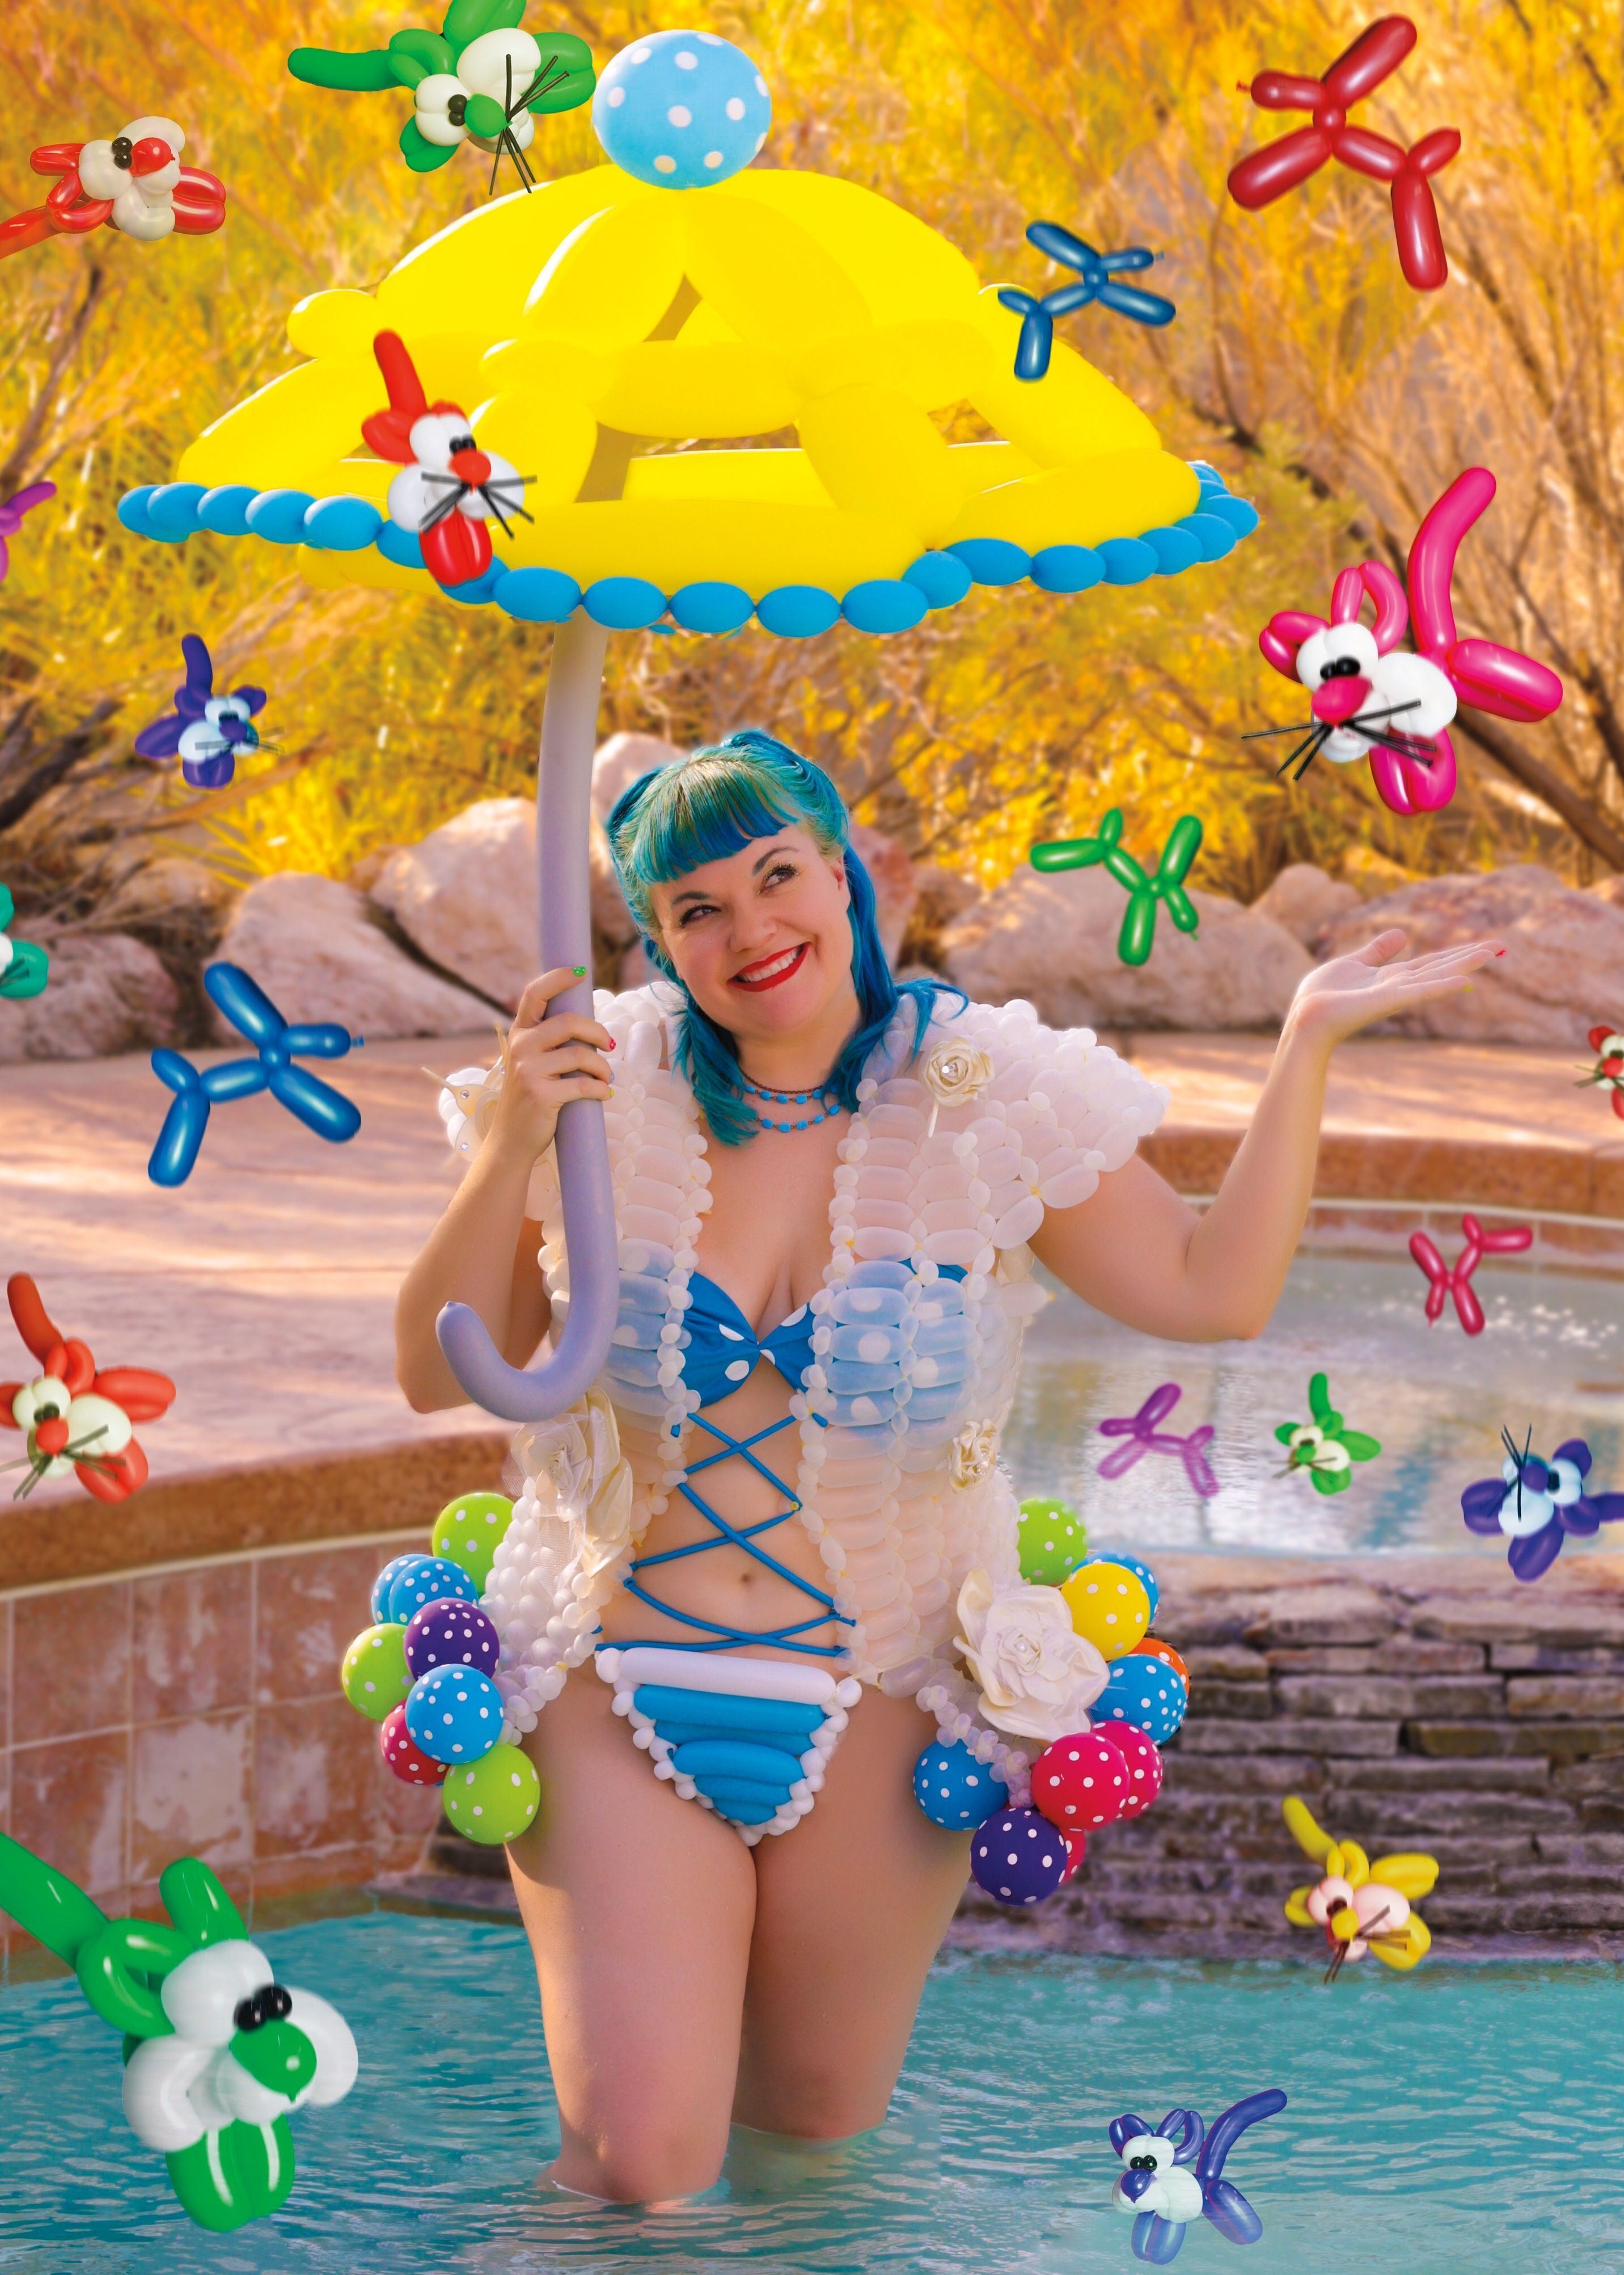 Bikinis made out of balloons